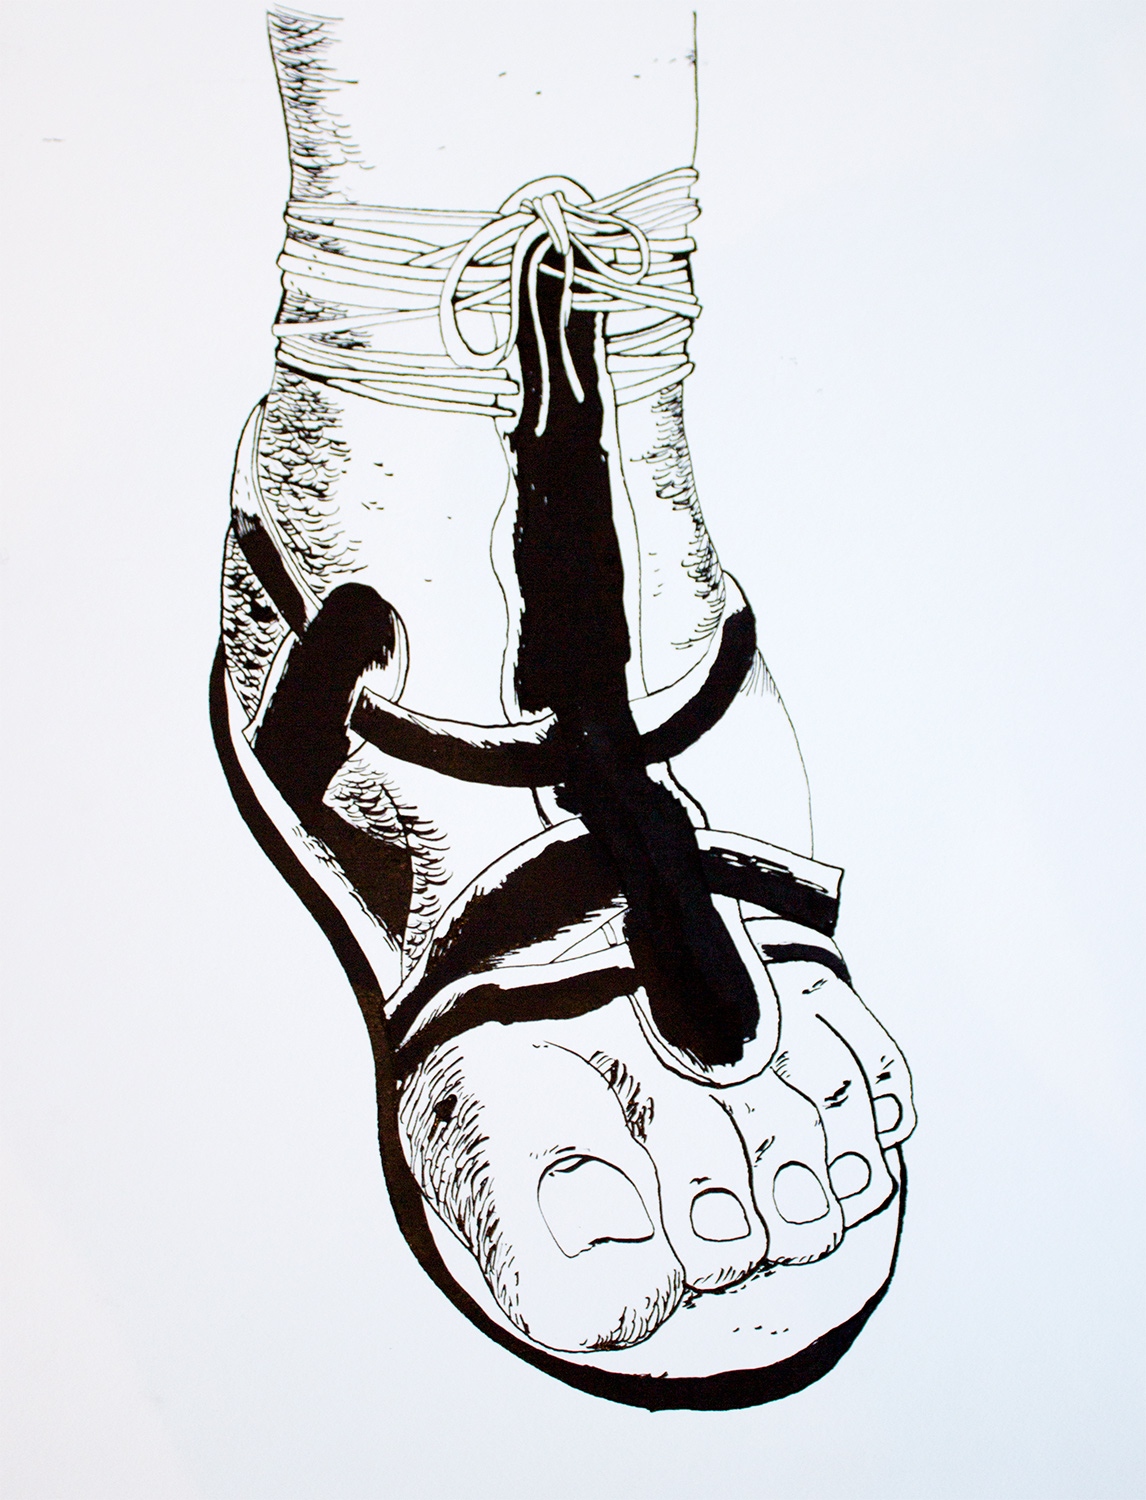 foot logo gladiator strong and expressive art illustrations and drawings, talented Danish illustrator, cartoonist